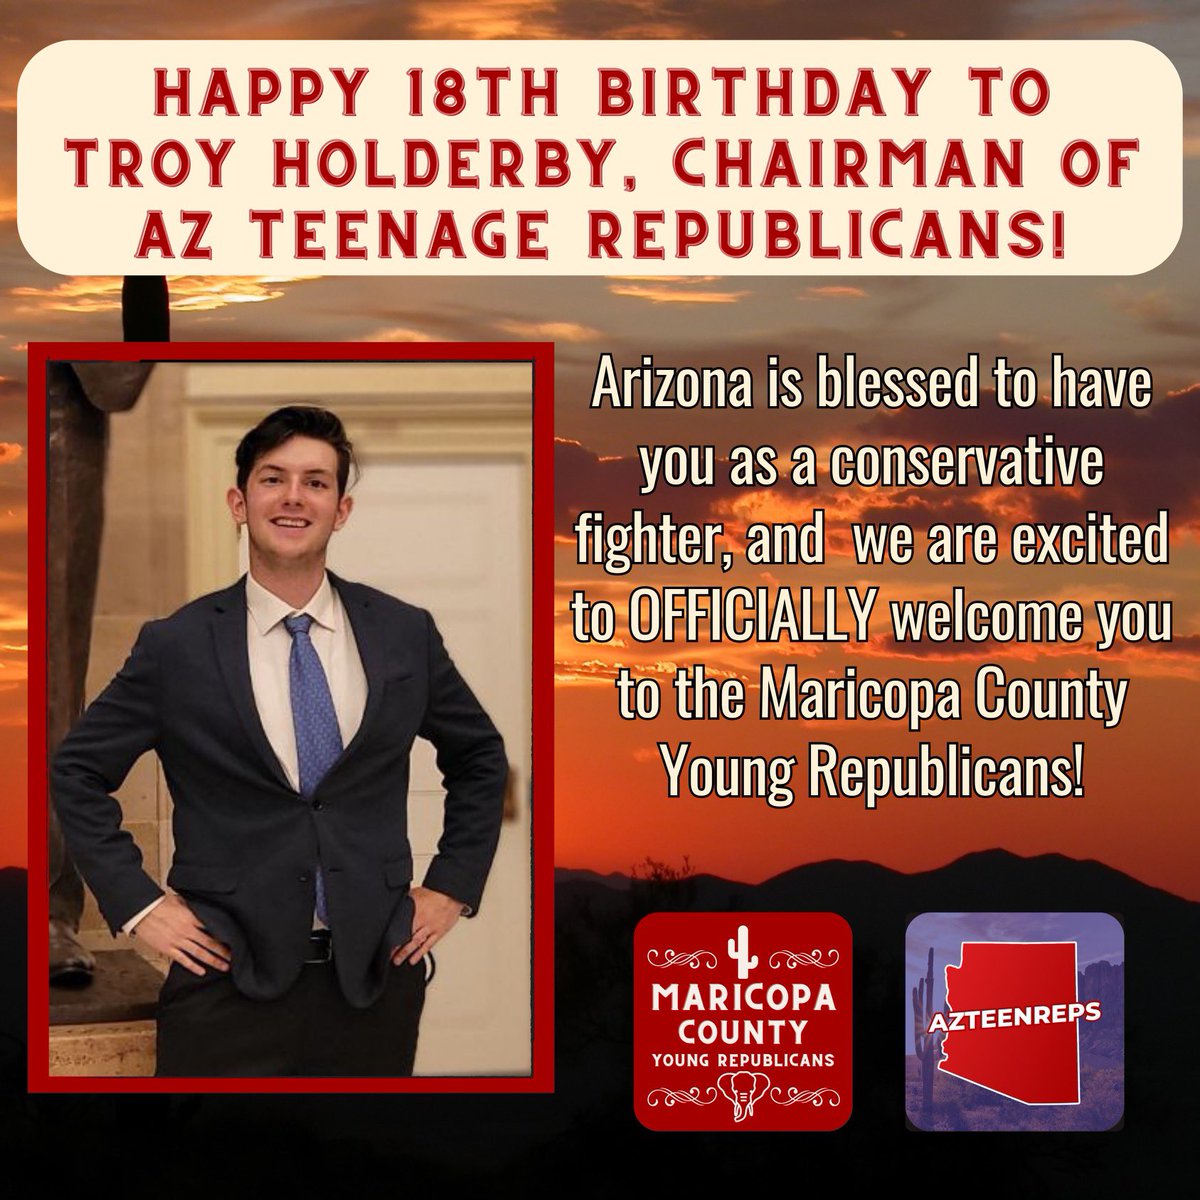 Happy 18th birthday @TroyHolderby, we hope you have the best day! Welcome to @MCYRGOP! 🌵🐘🇺🇸